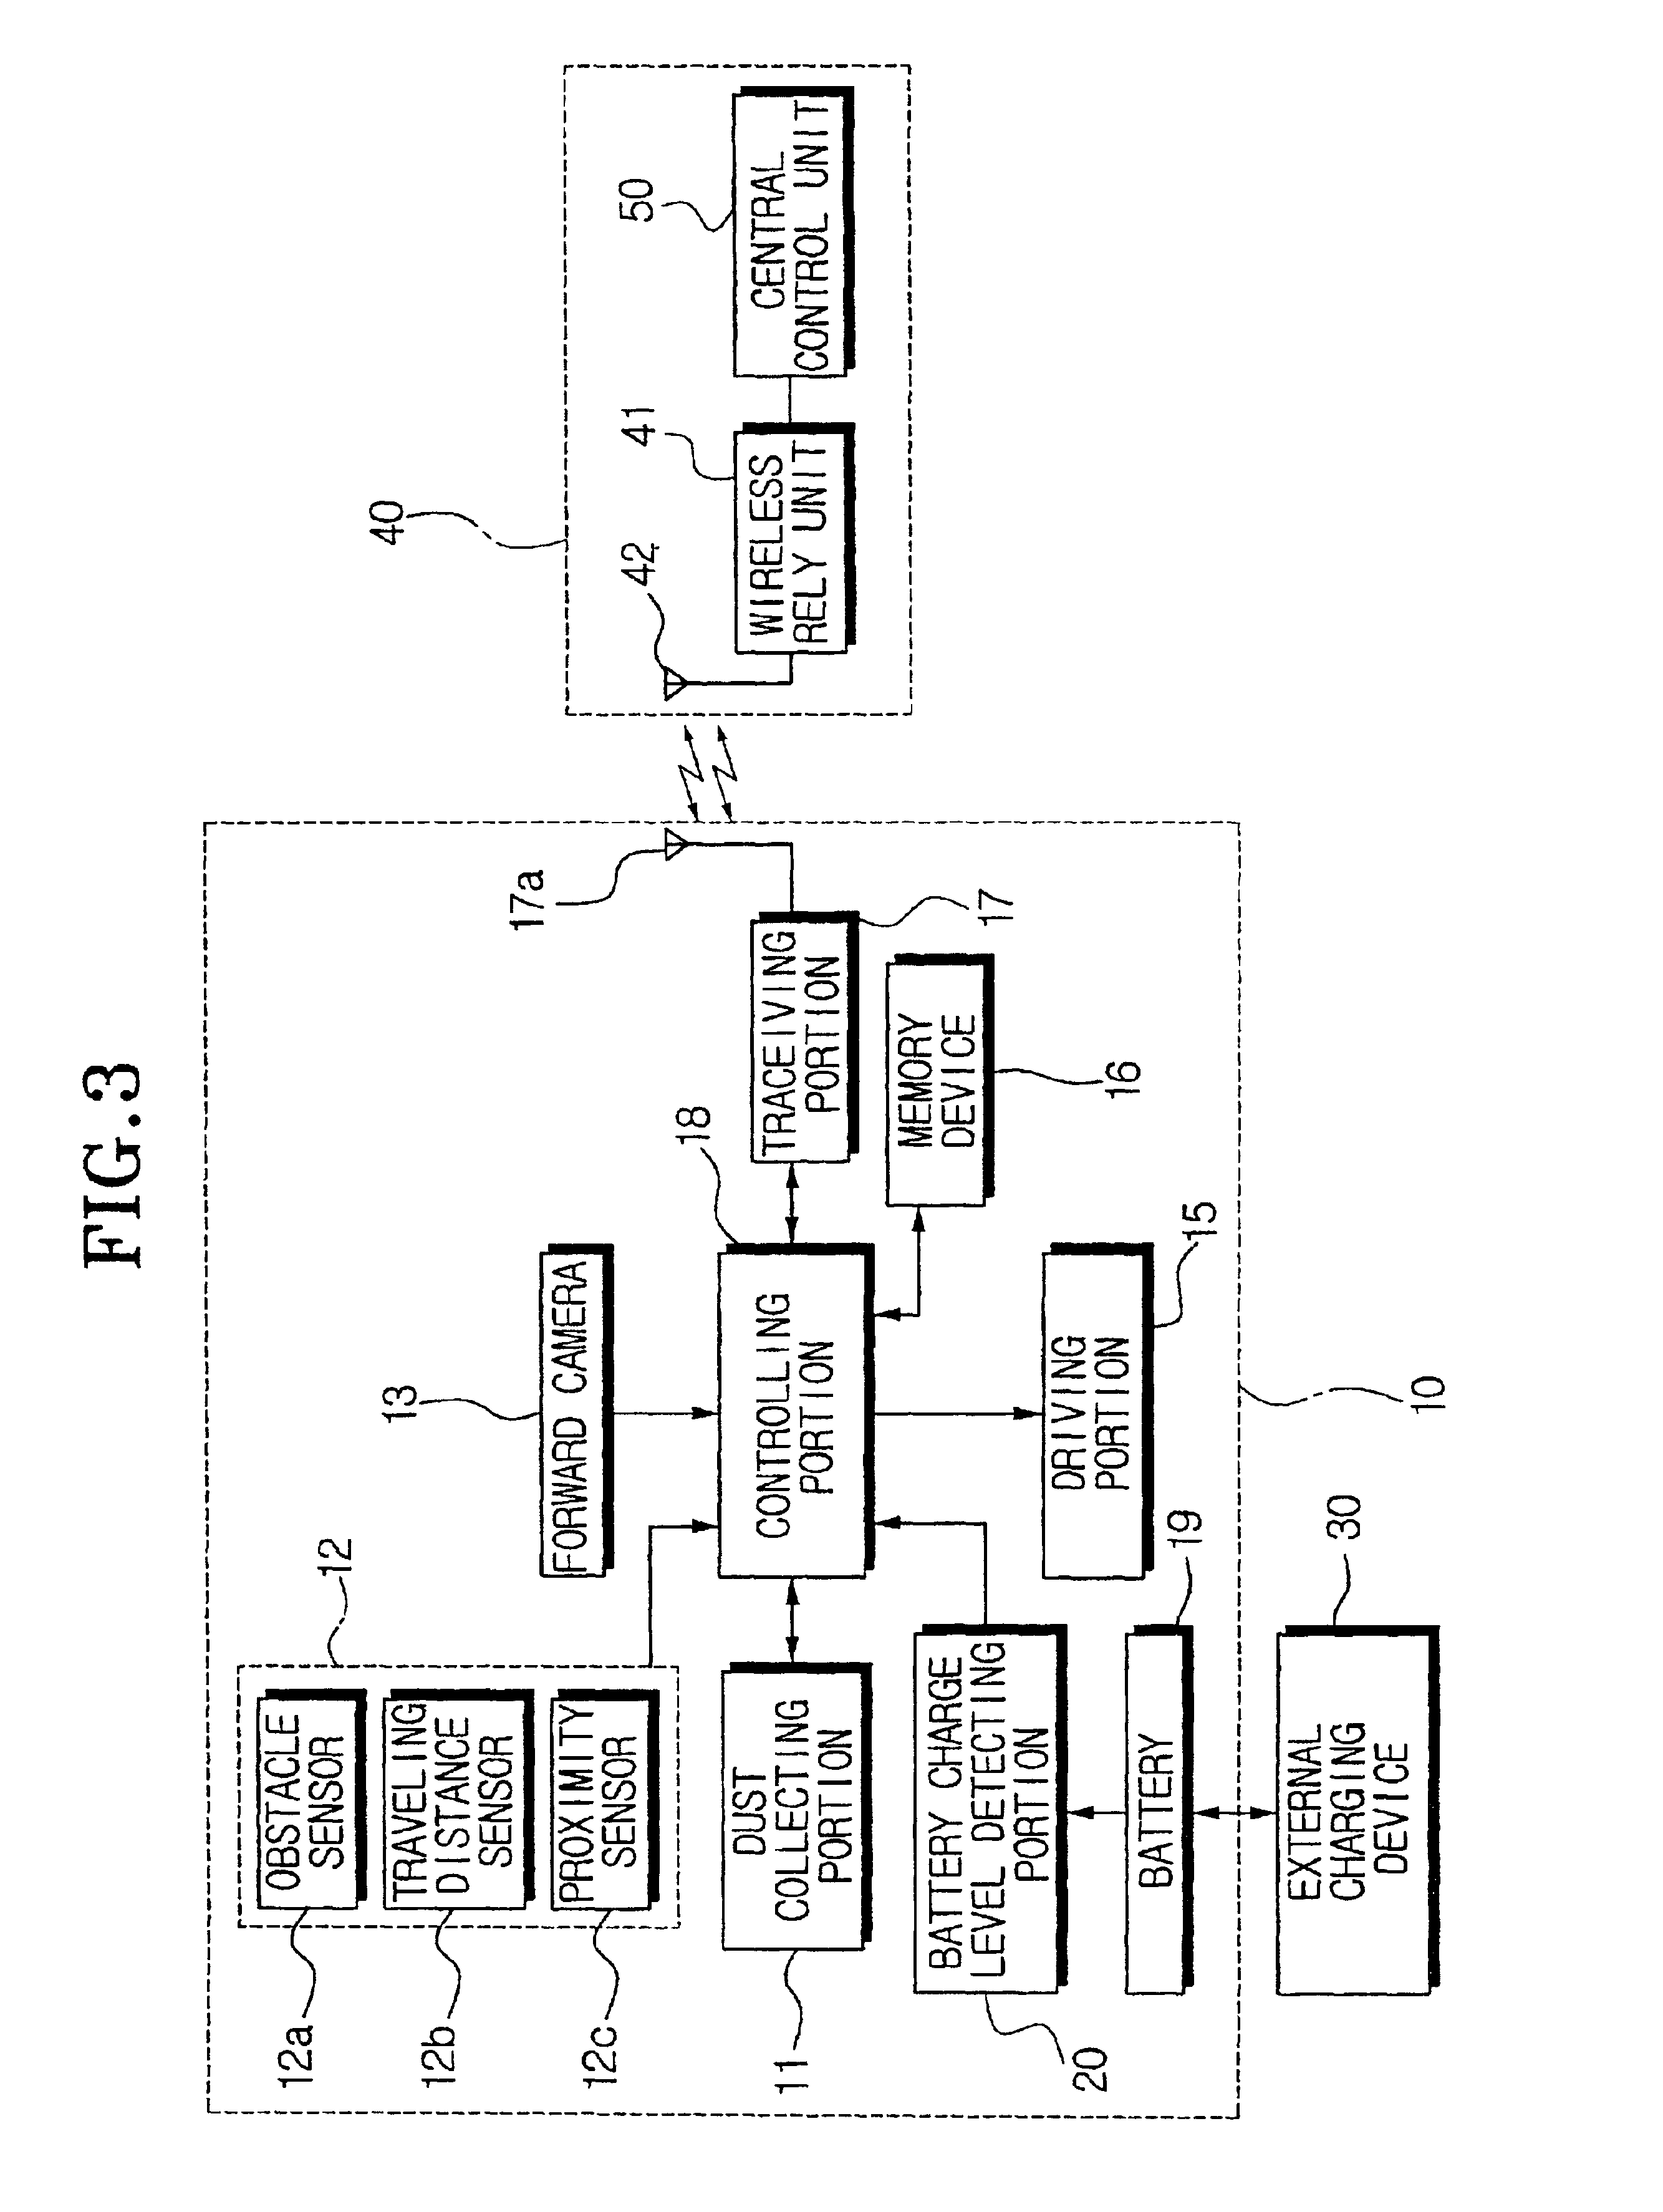 Robot cleaner, system thereof and method for controlling same